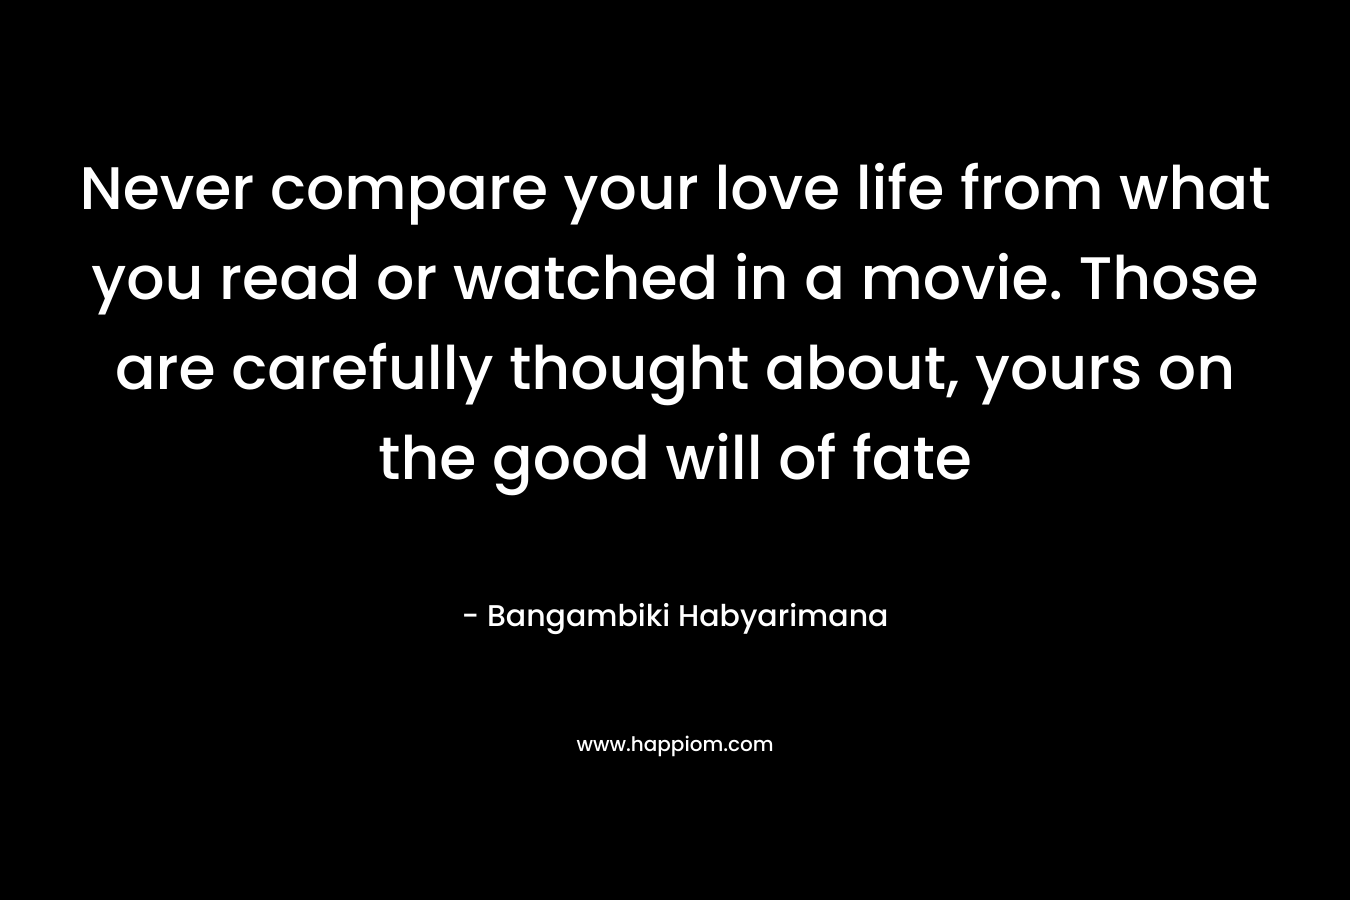 Never compare your love life from what you read or watched in a movie. Those are carefully thought about, yours on the good will of fate